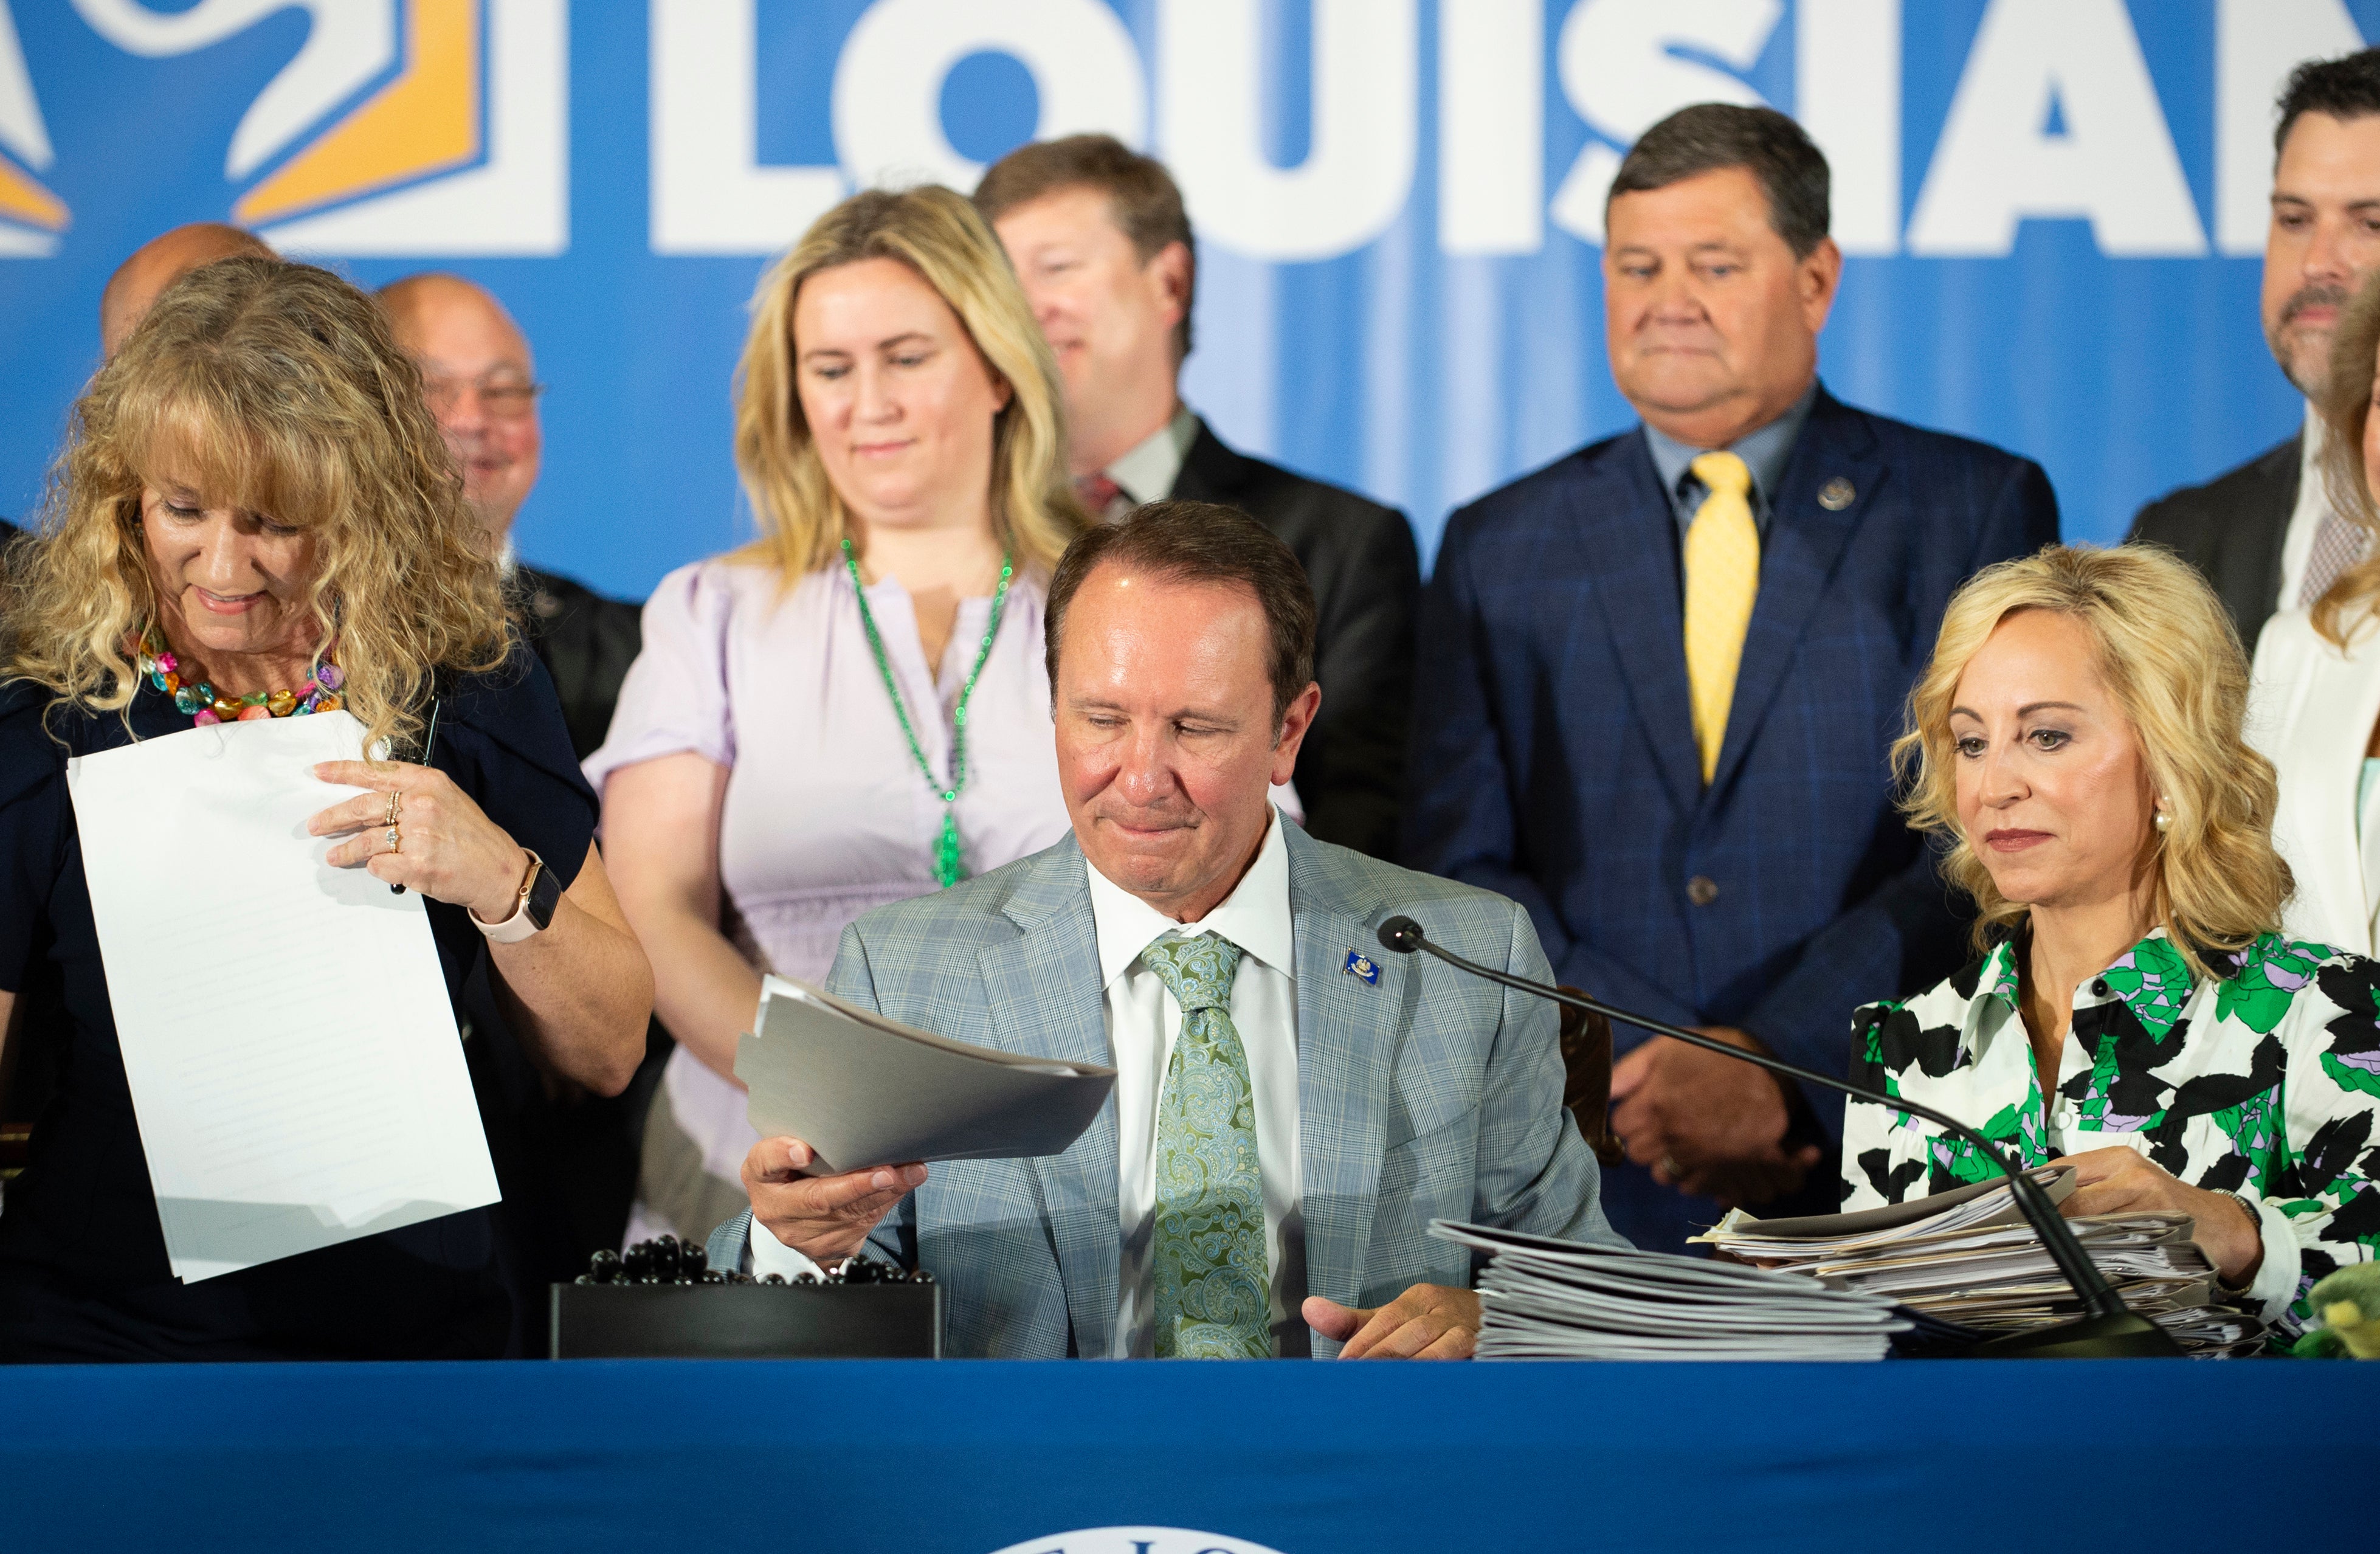 Louisiana’s Republican Governor Jeff Landry approved legislation requiring that the Ten Commandments be displayed in every public school classroom on June 19. Five days later, civil rights groups and parents of public school students sued to block the law.